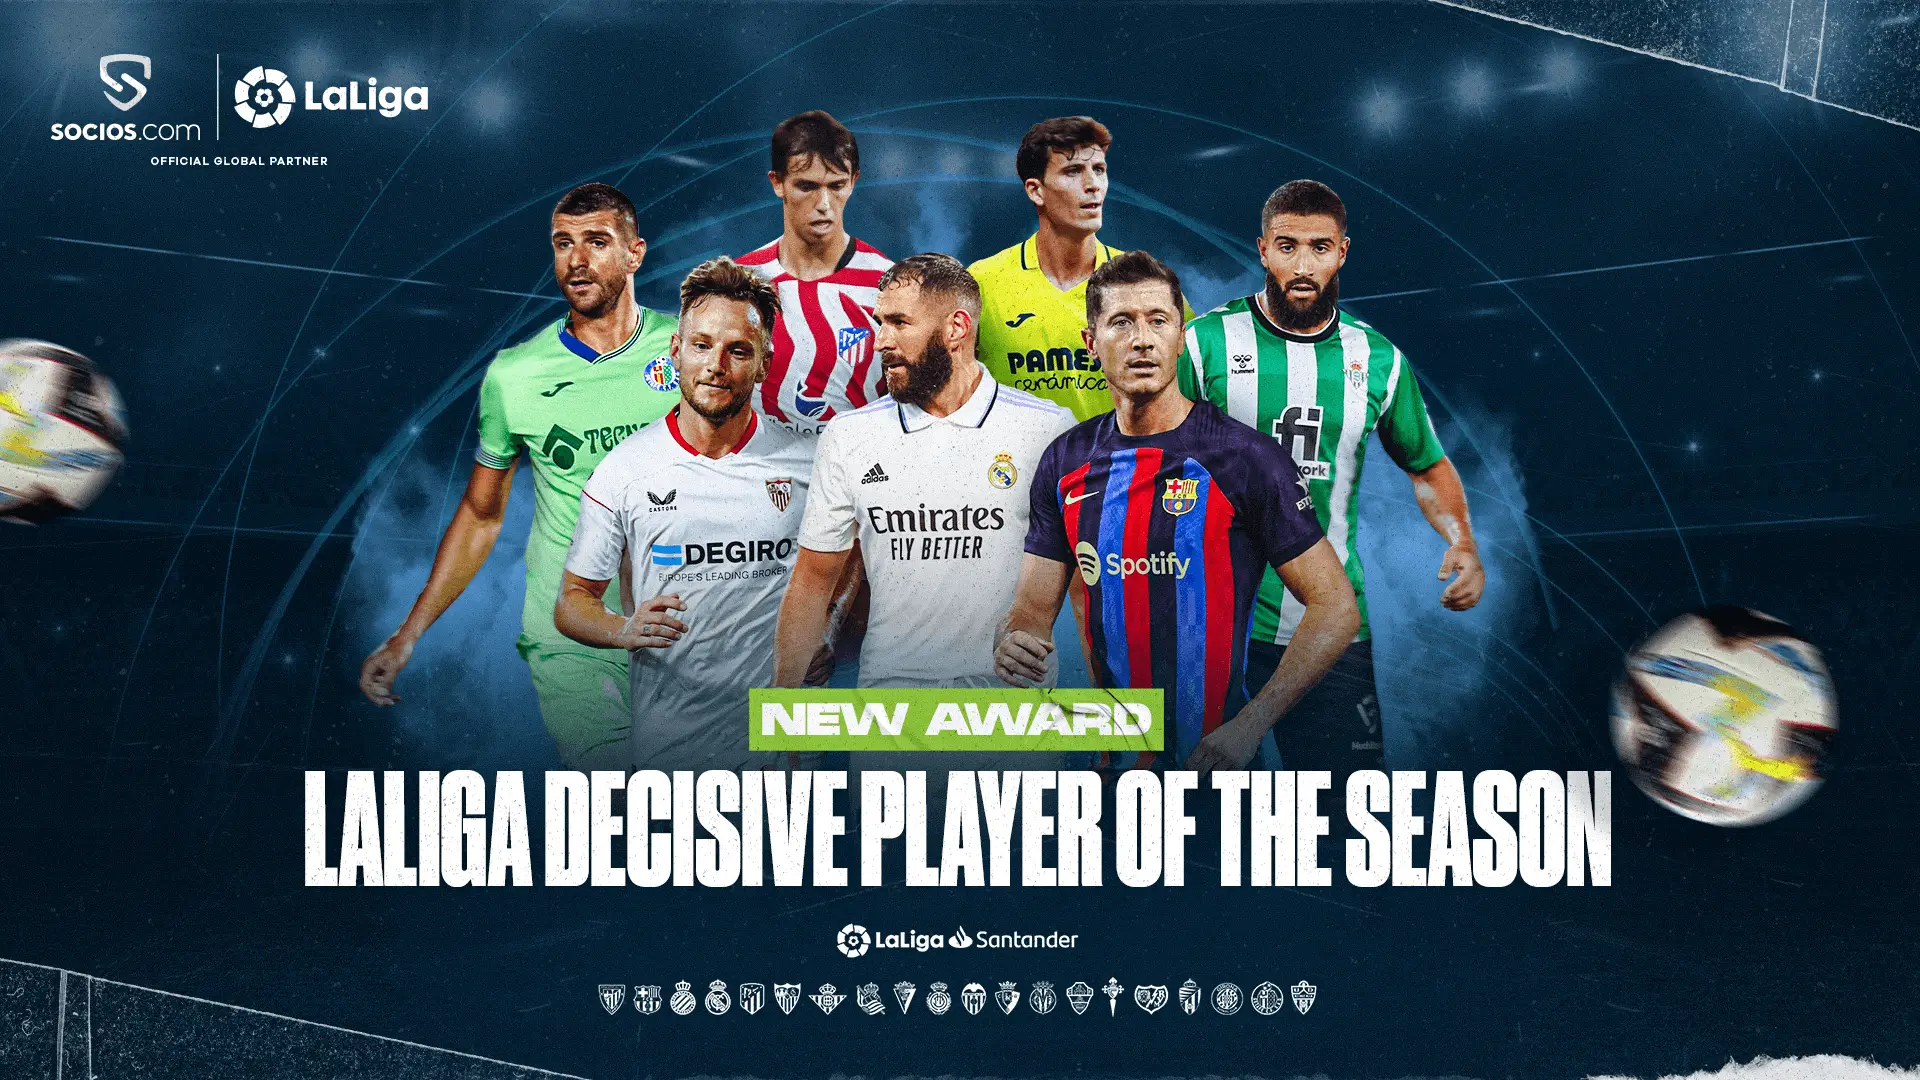 Vote-for-LaLiga’s-Most-Decisive-Player-and-win-a-match-ball-every-match-week